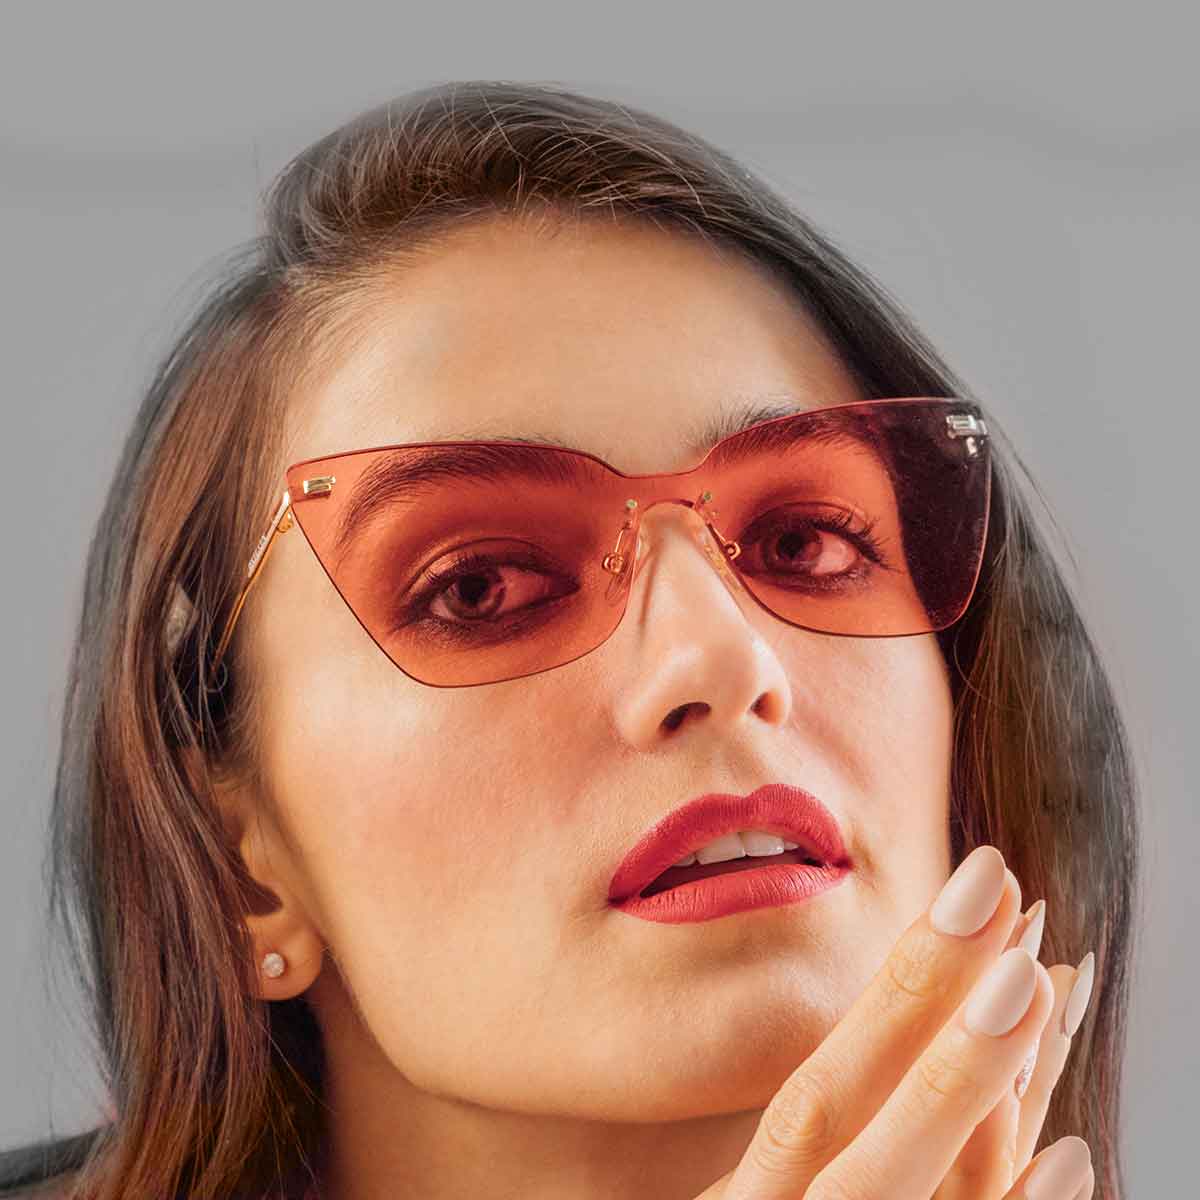 Sunglasses womens - Vision Express Philippines